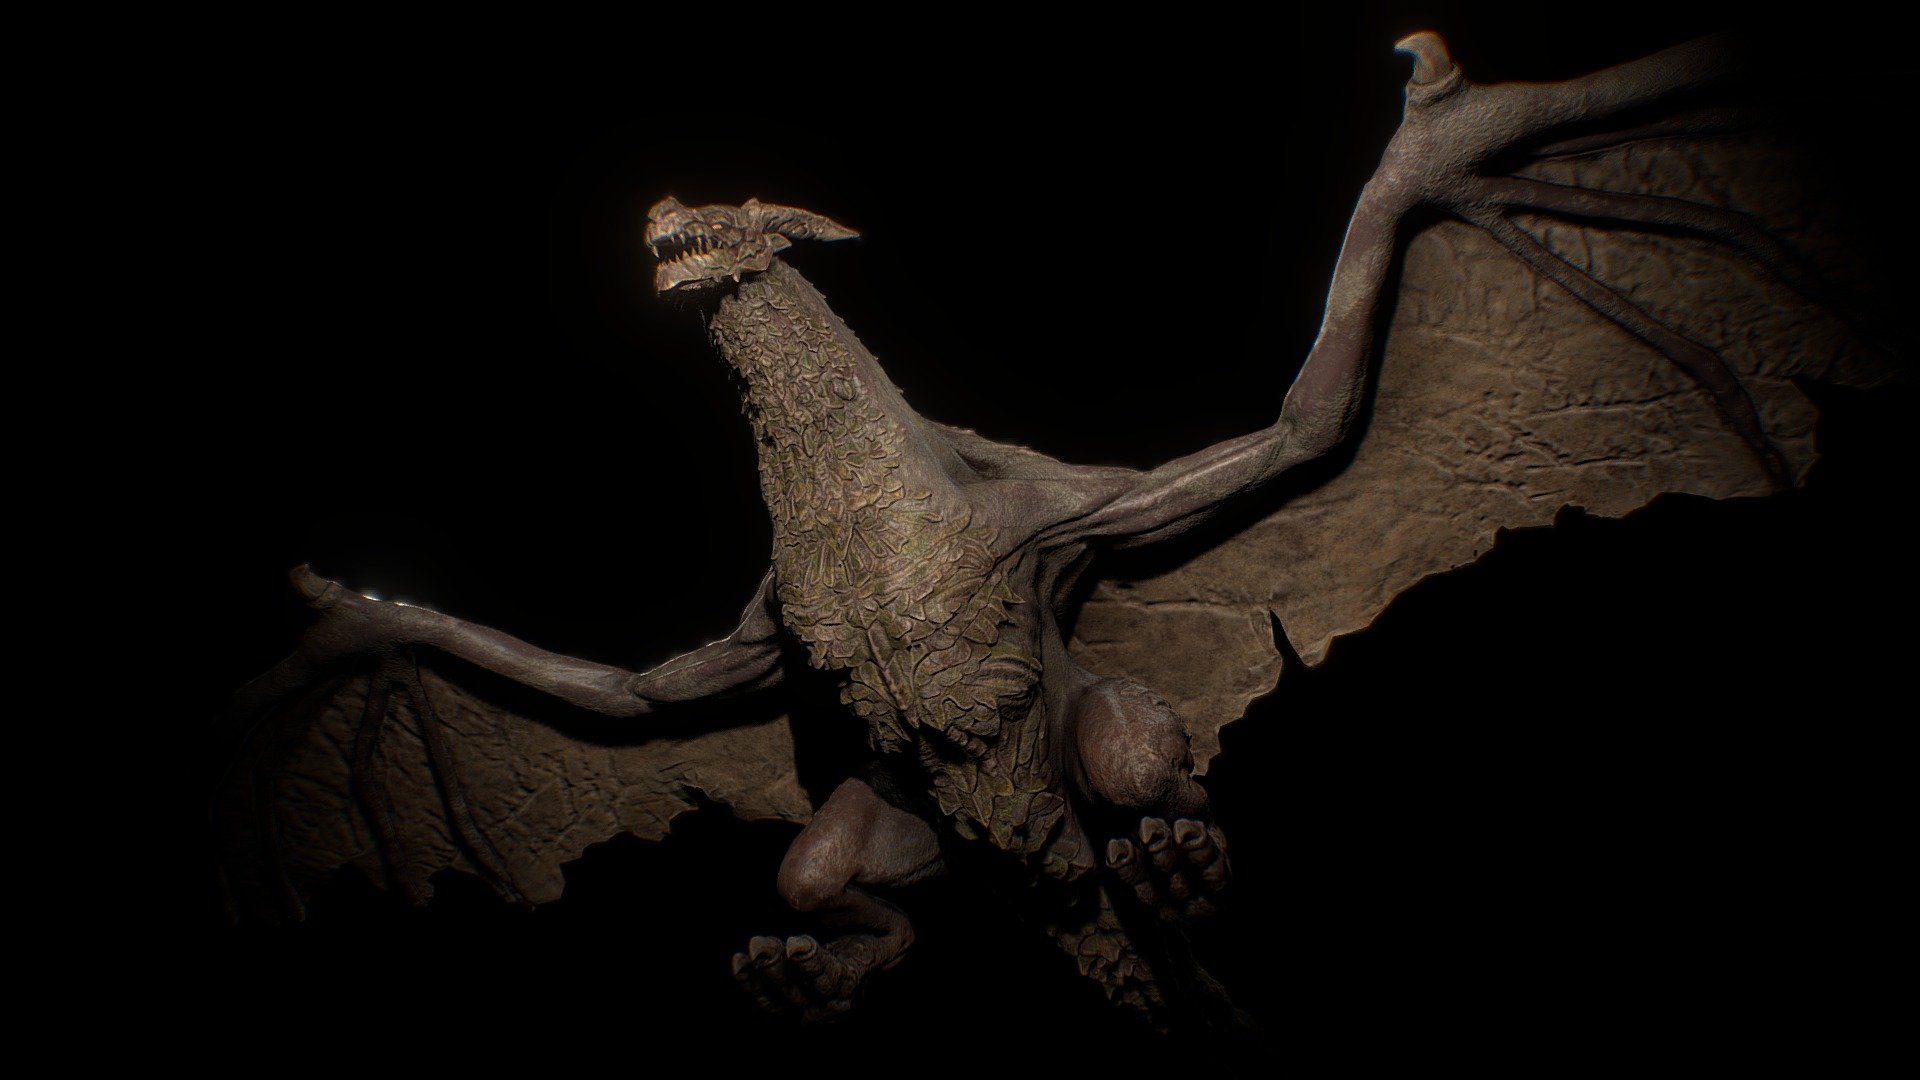 A mountain dwelling dragon.
This was a 3 months long project I did while studying at CG Spectrum.
Really love how it turned out, and really enjoyed learning new skills in texturing and modeling 3d model